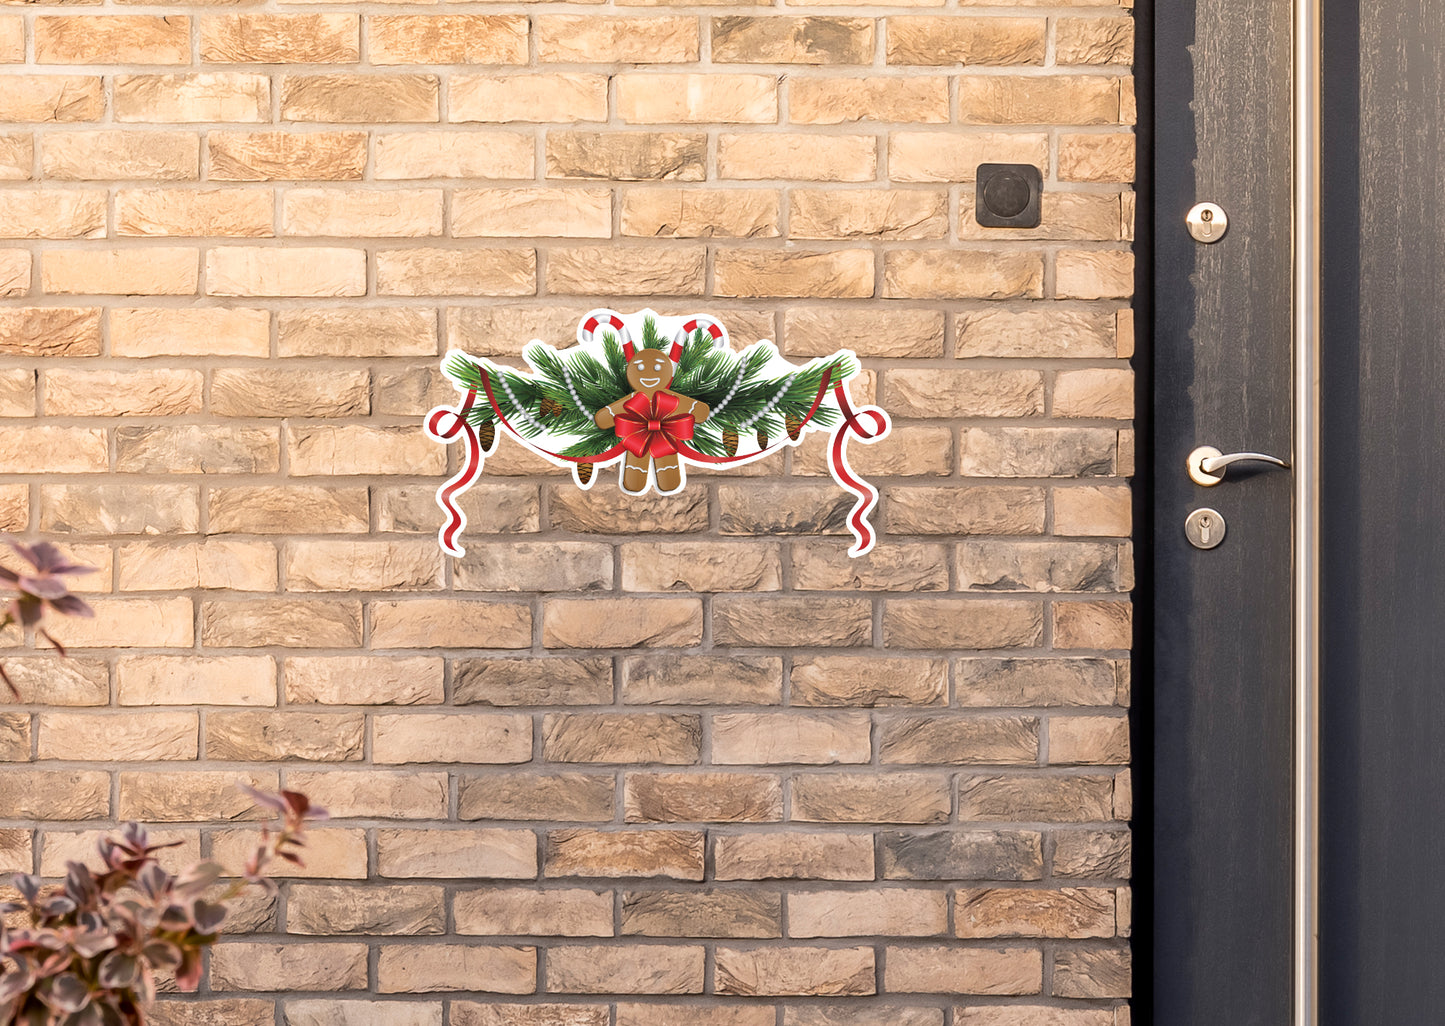 Christmas: Gingerbread Man - Outdoor Graphic